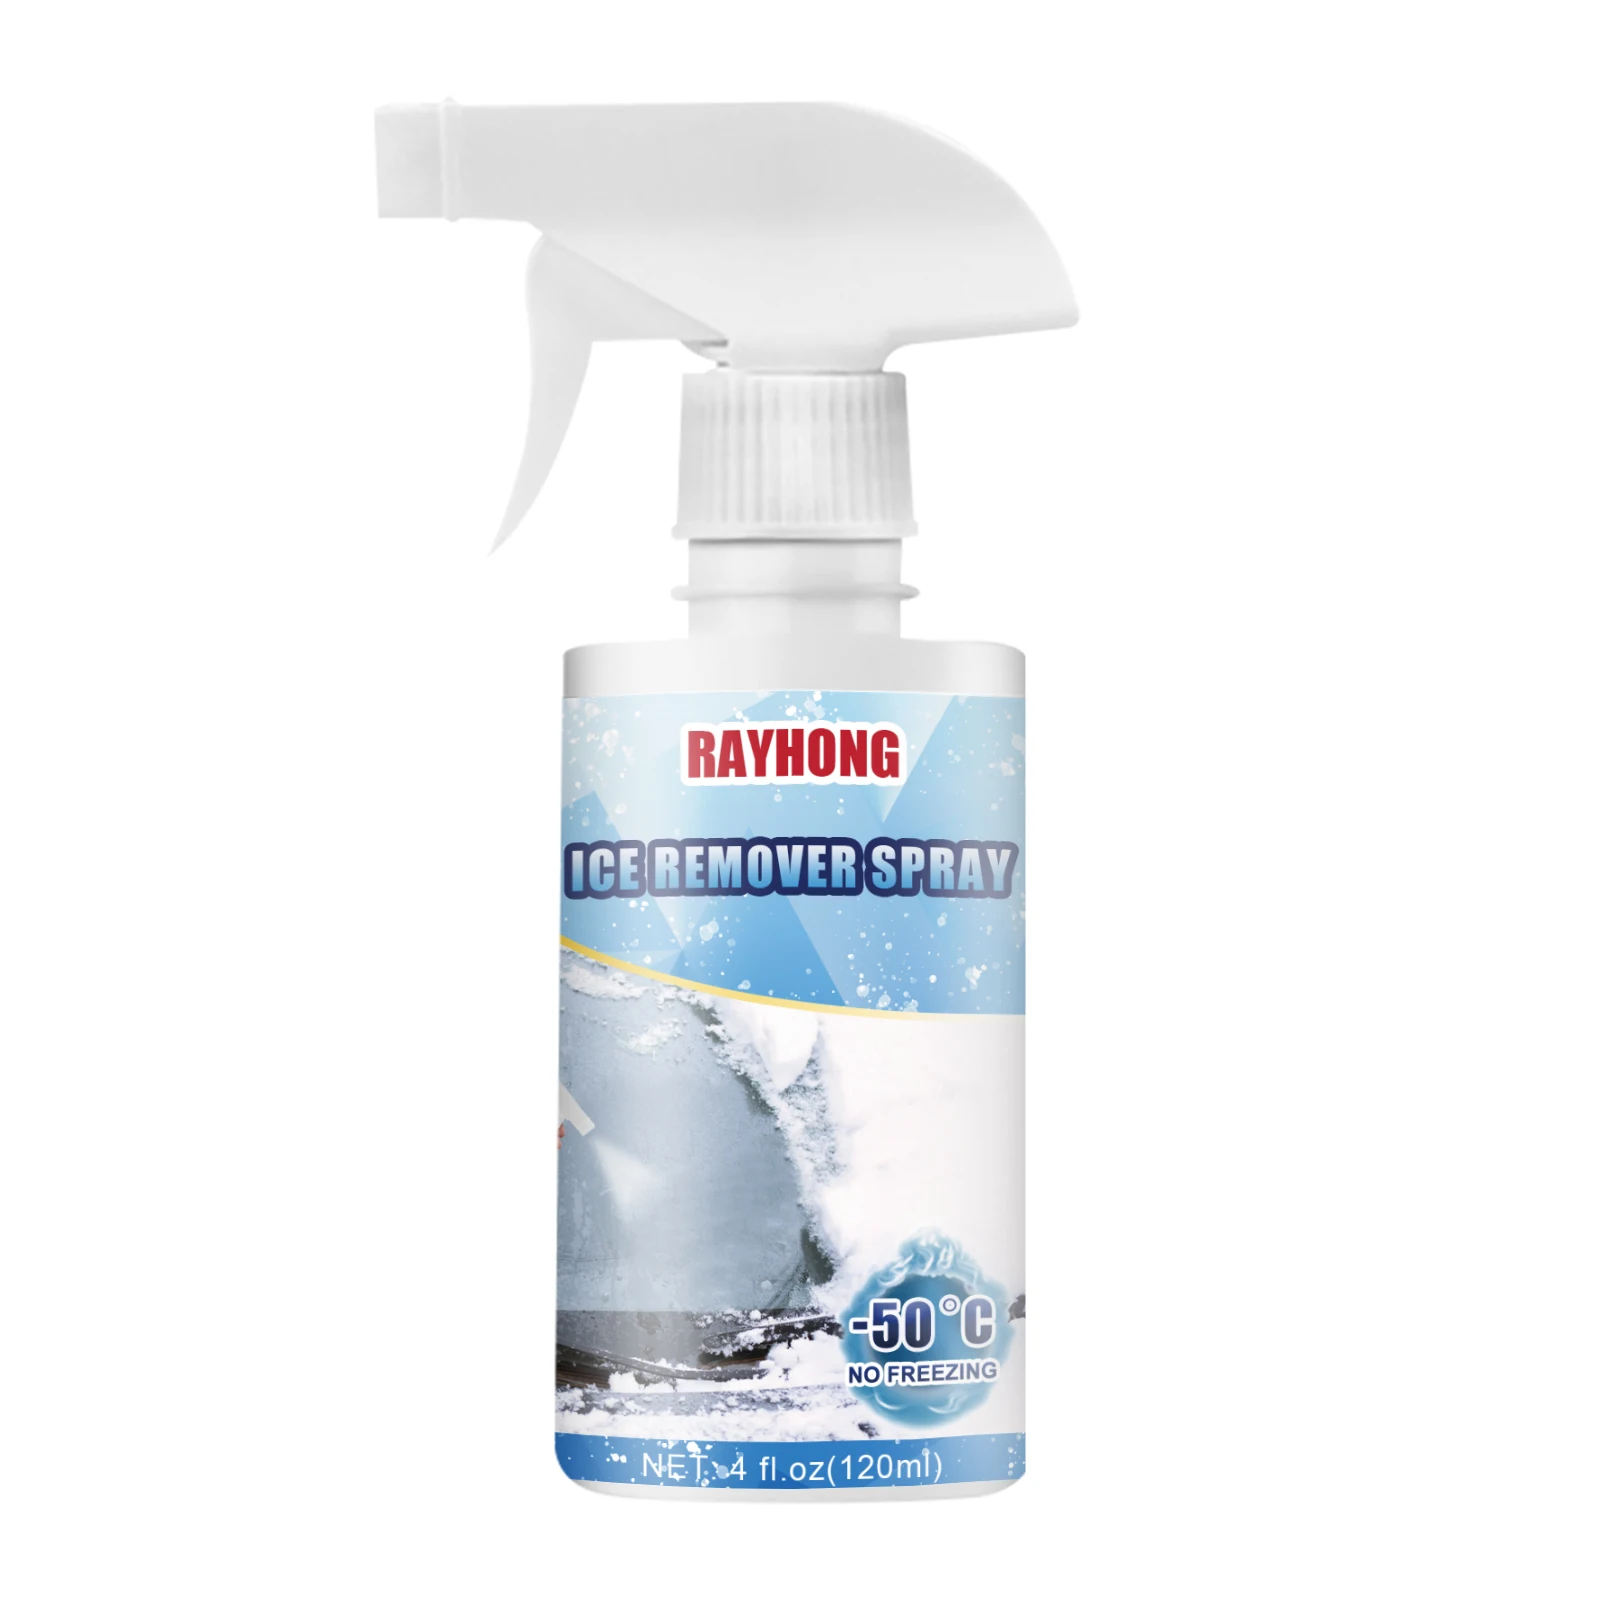 Car Windshield Deicing Agent Rapid Thawing Antifreeze Agent For